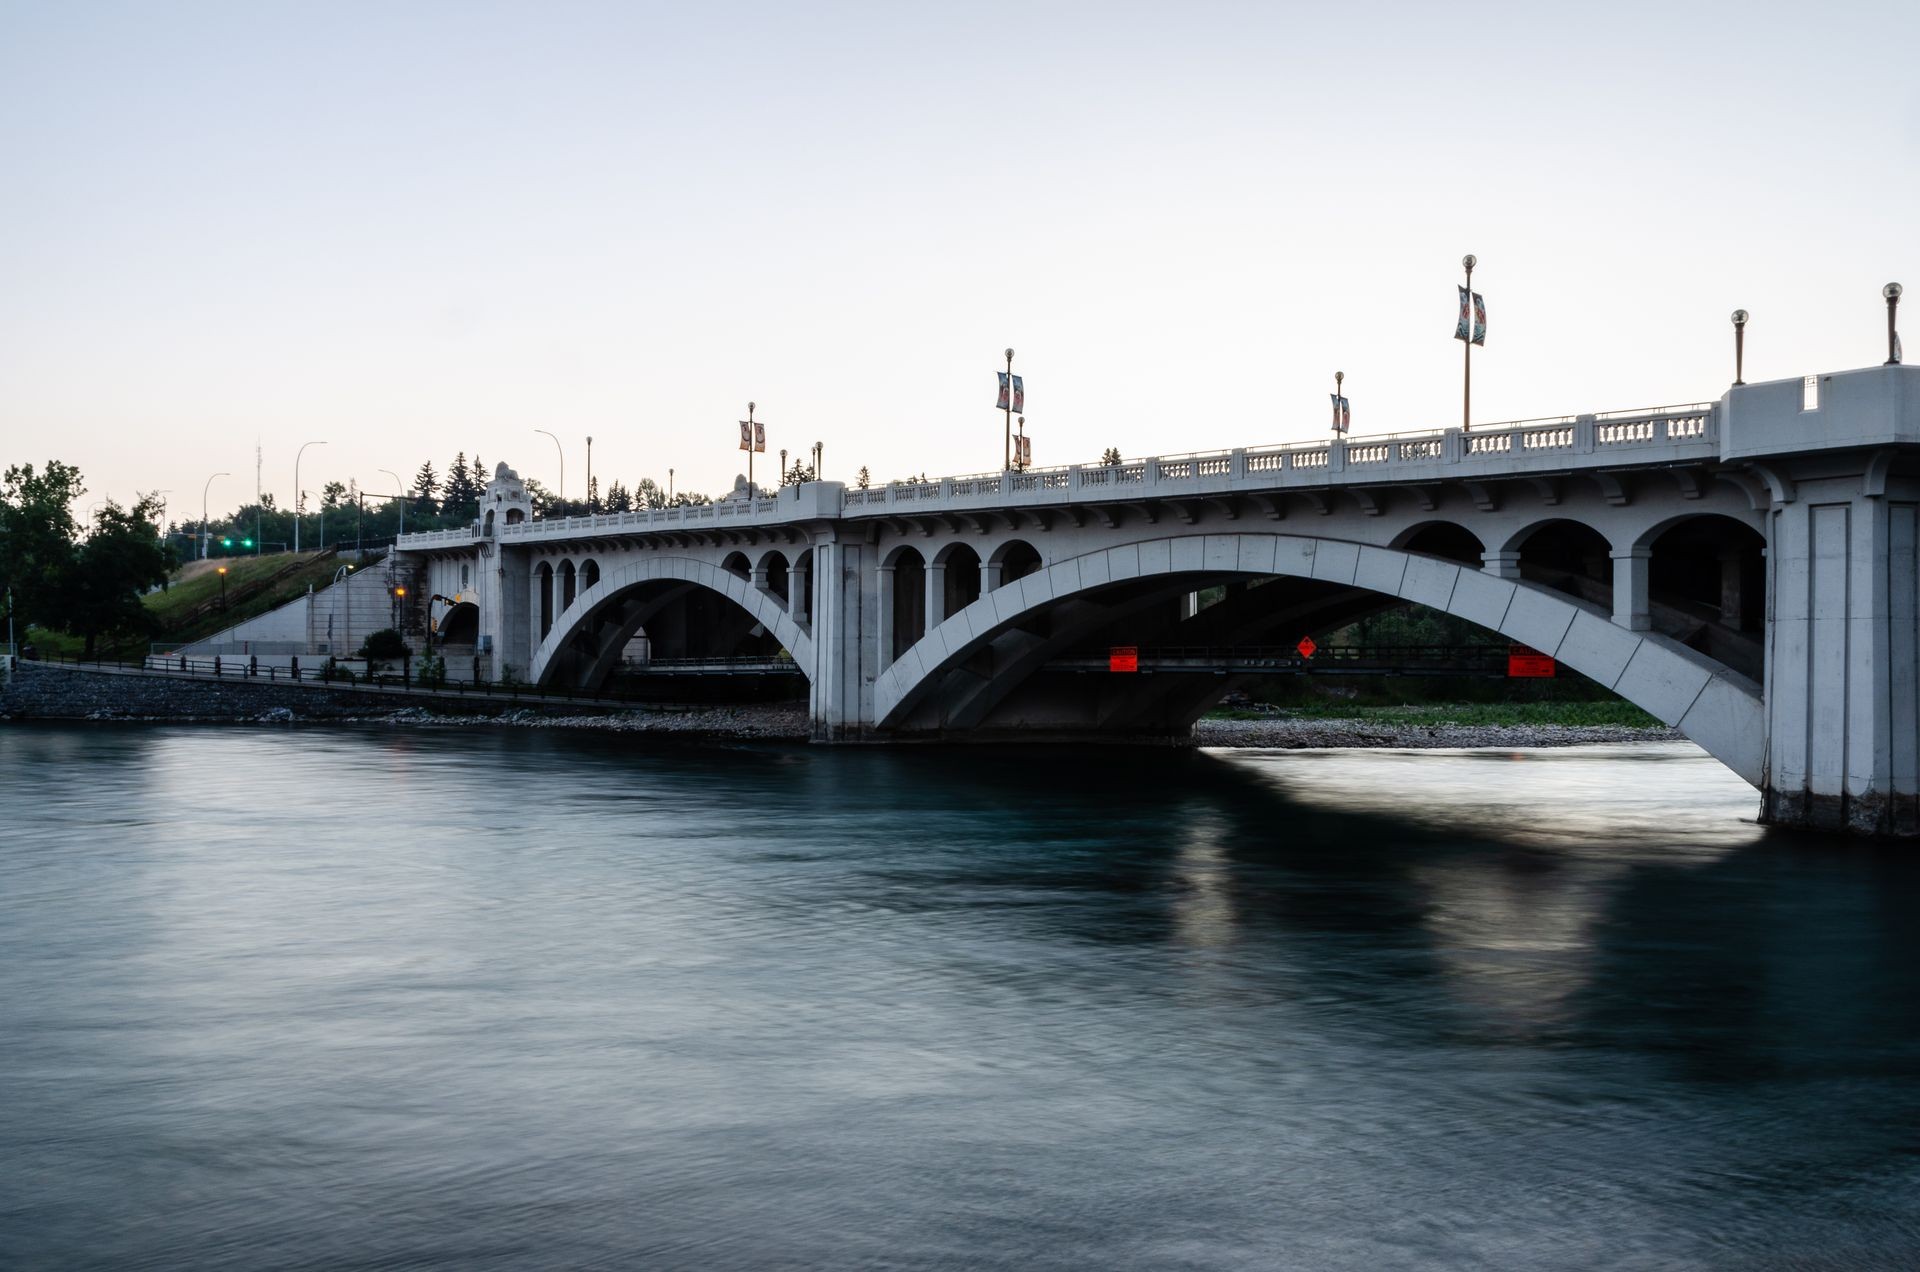 Long exposure of Centre Street Bridge over Bow River in Calgary, Alberta, Canada on the morning of 28th July 2018